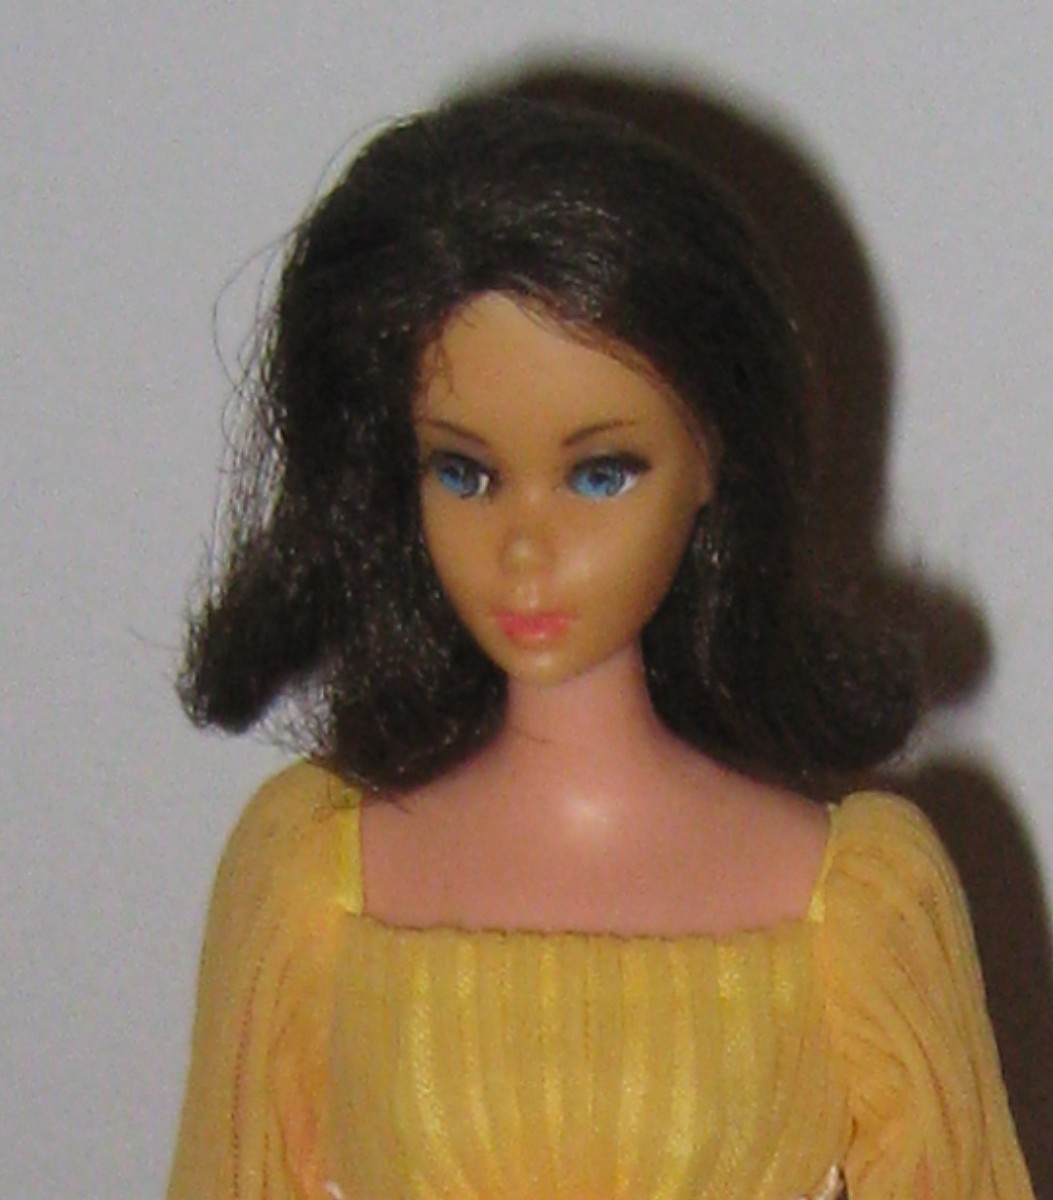 Barbie Doll's 1970 - a New Decade! - HubPages